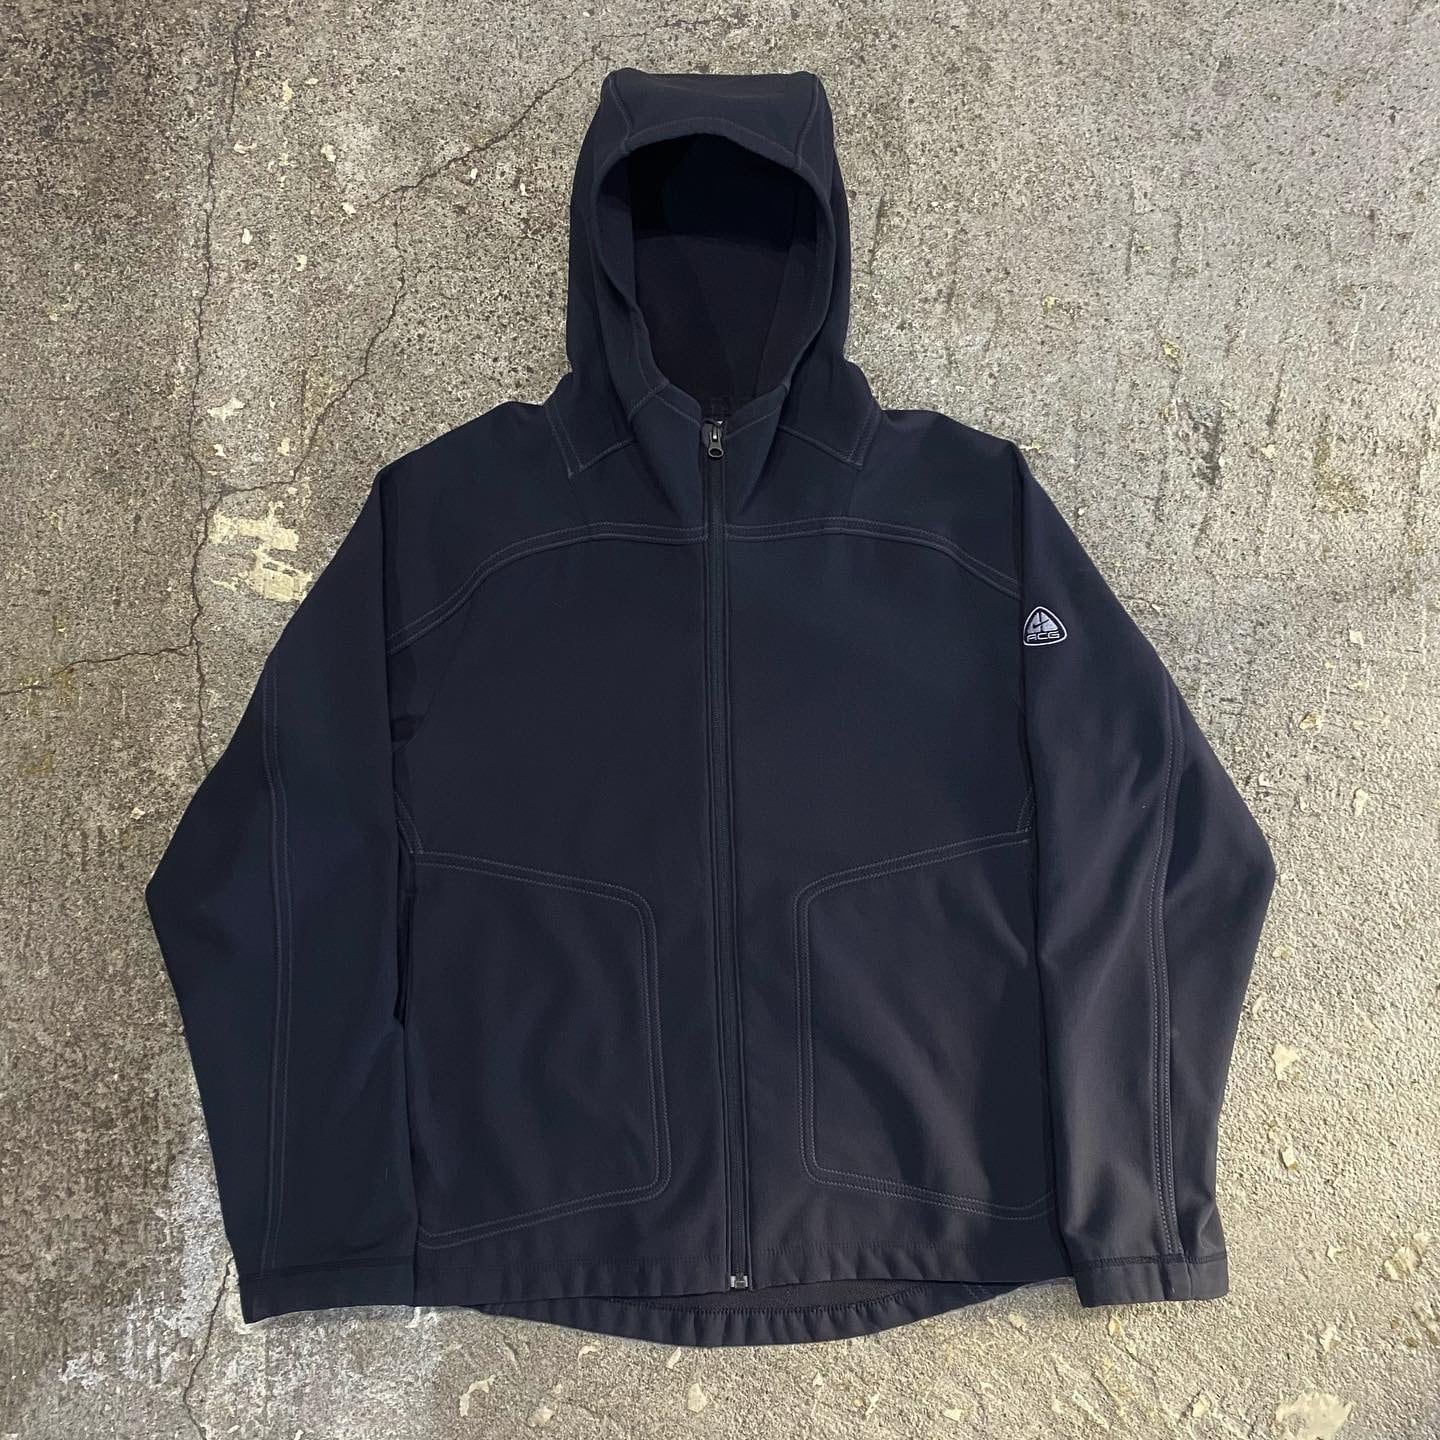 00s nike acg recco system jacket